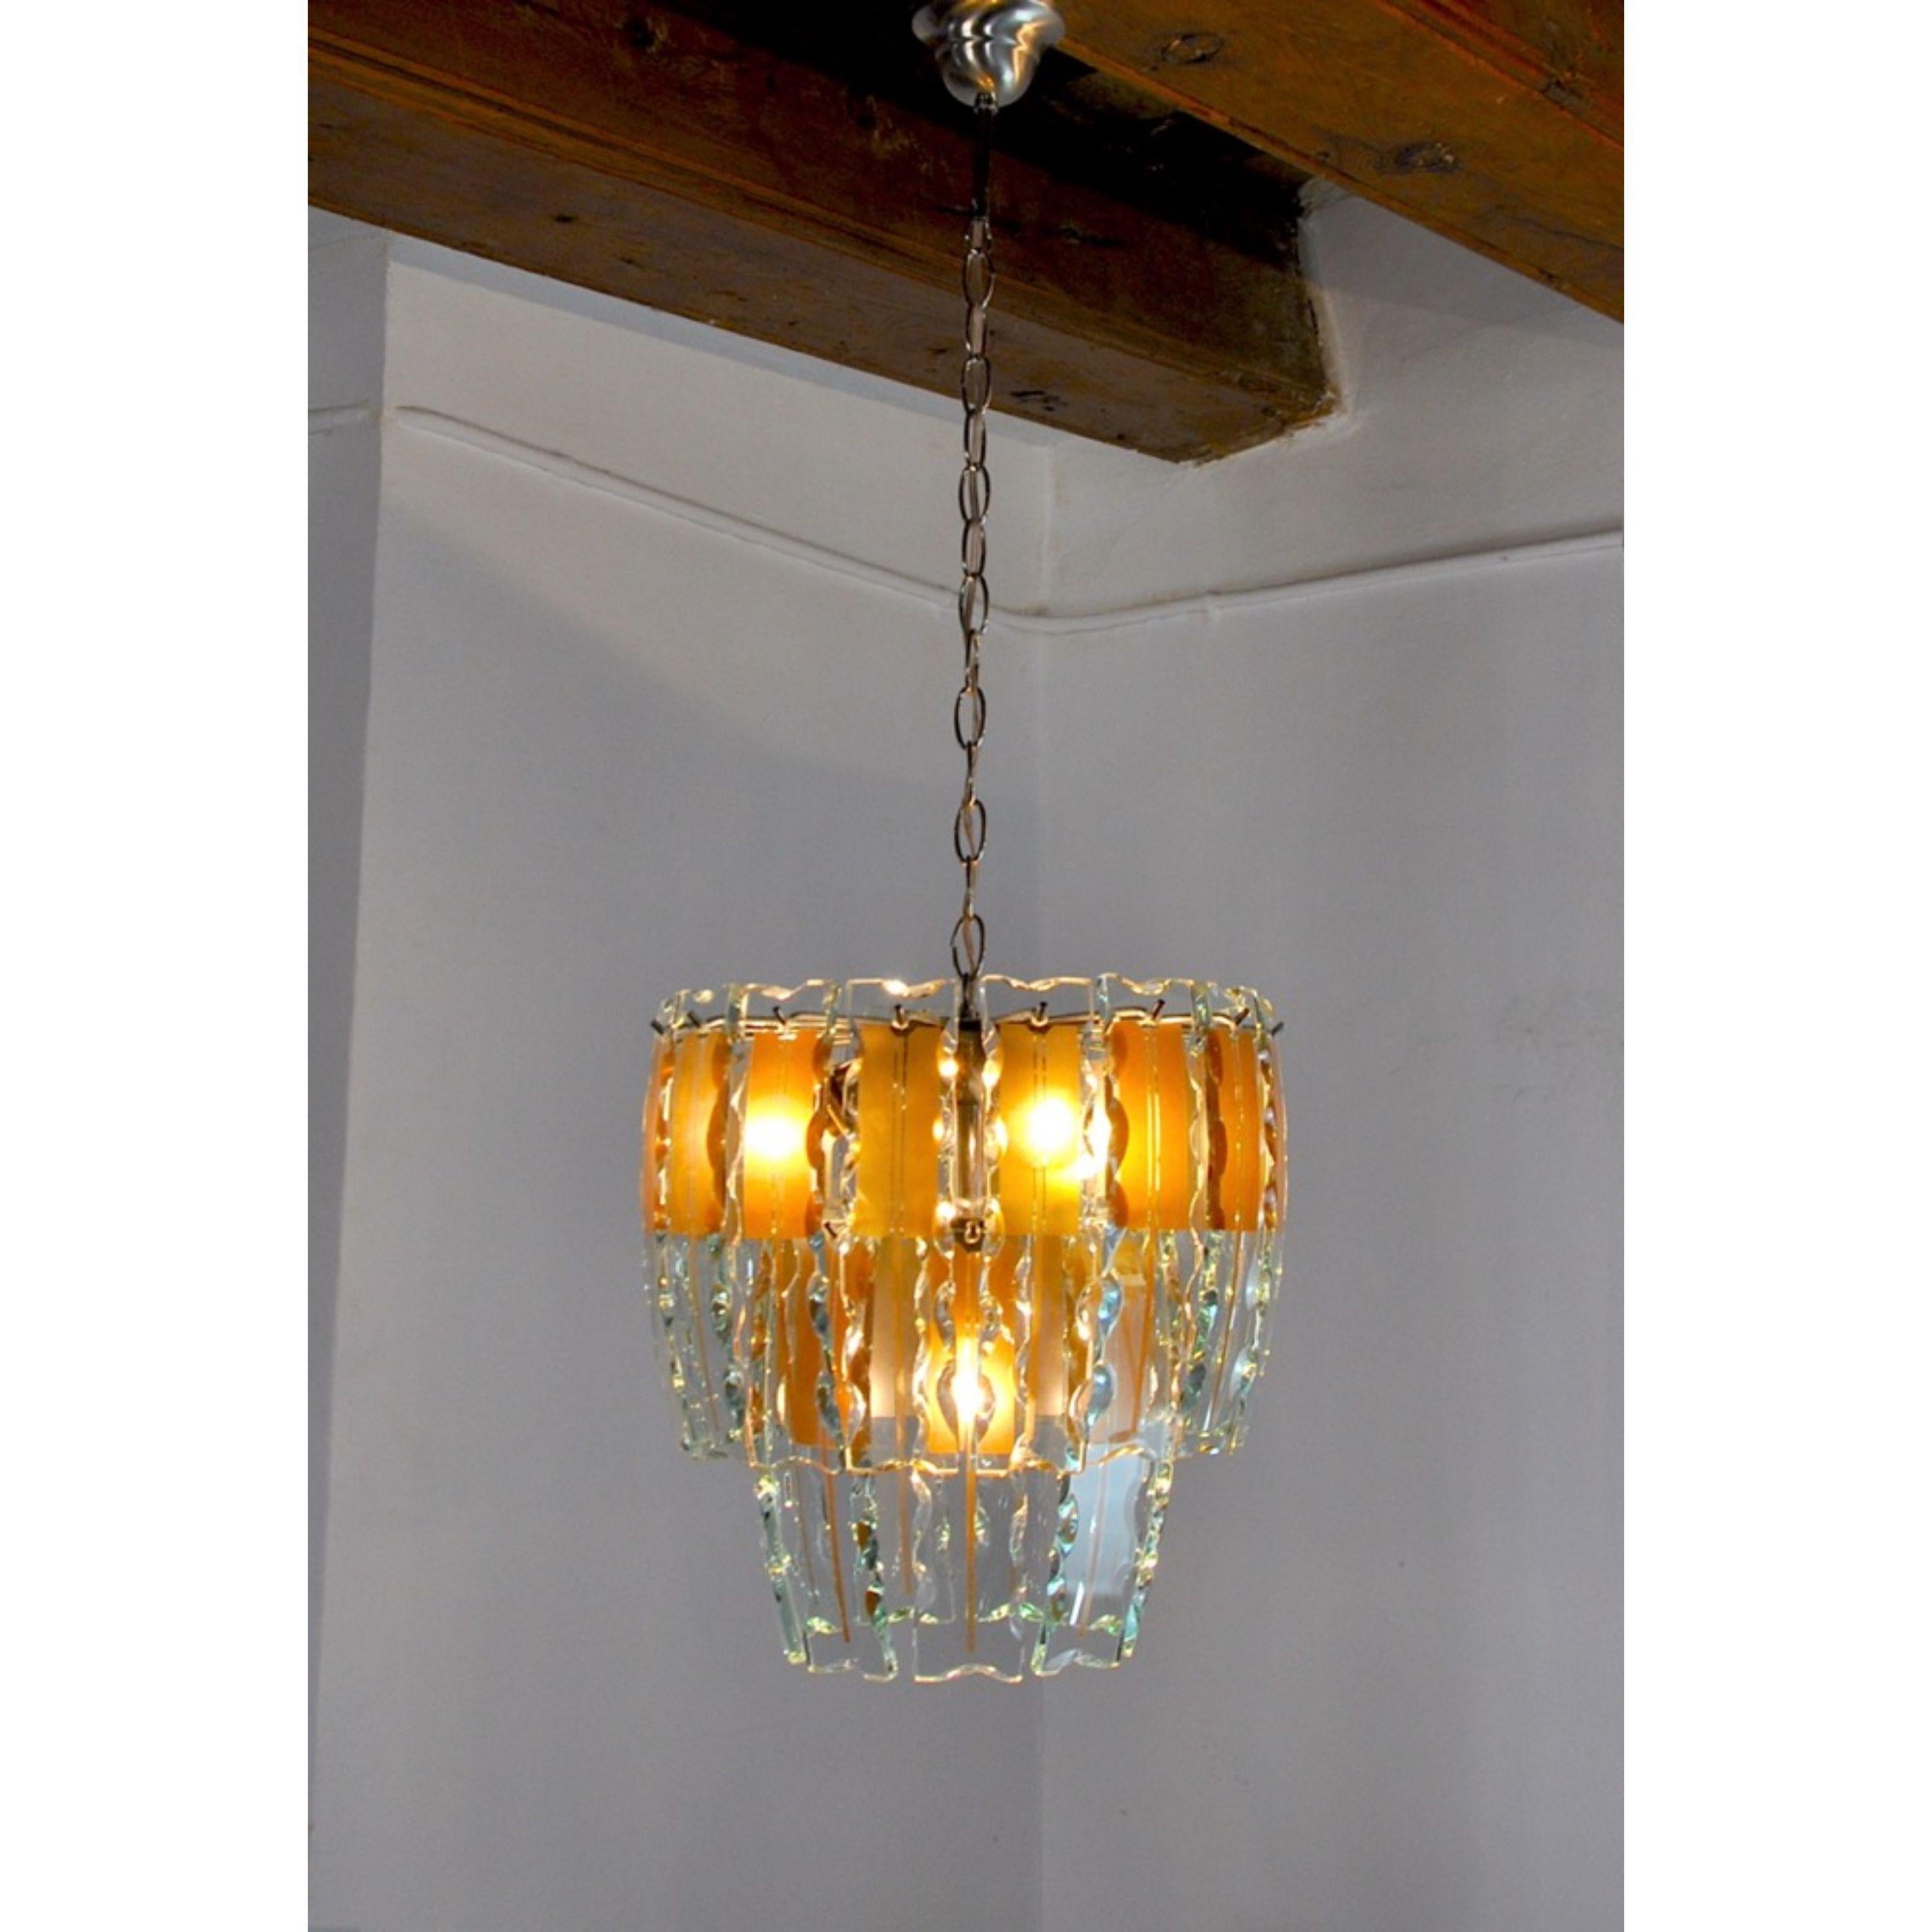 Zero cuattro chandelier designed and produced in the 70s in Murano, Italy.
Chrome structure and brown engraved crystals in good condition.
Rare design object that will illuminate your interior perfectly.
Verified electricity, time marks consistent